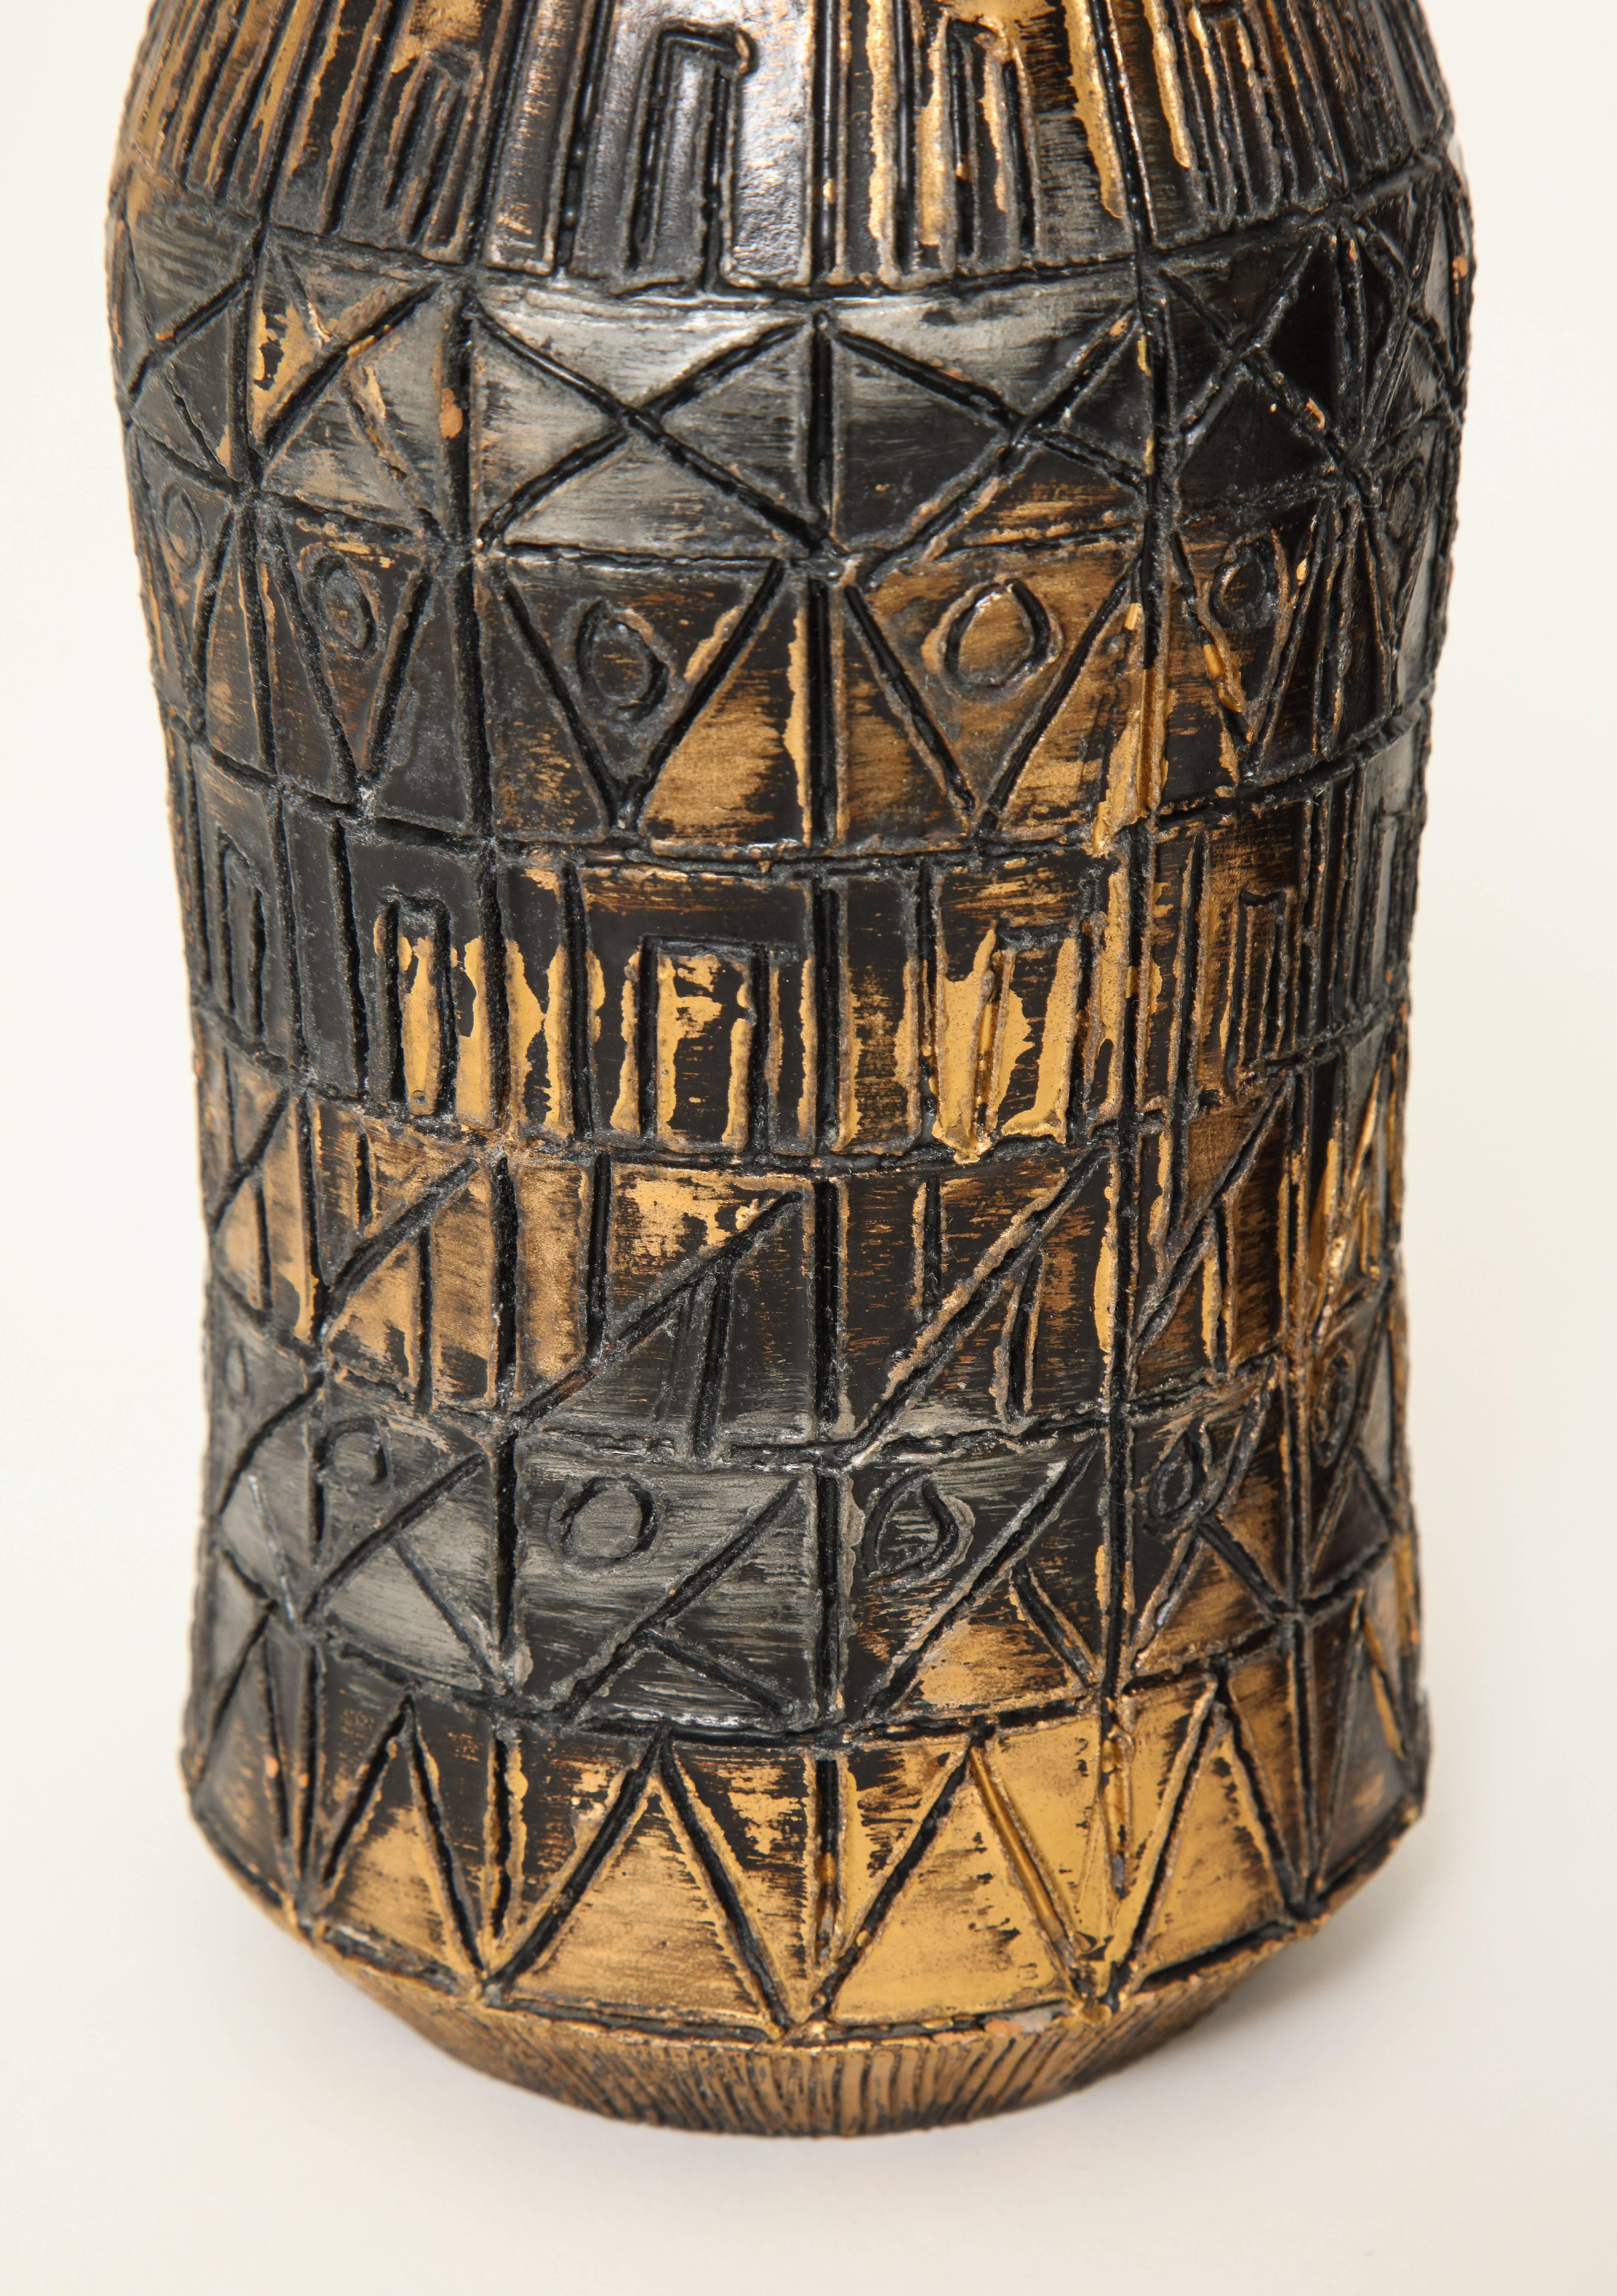 Mid-20th Century Raymor Vases, Ceramic, Sgraffito, Gold, Silver, Bronze, Signed For Sale